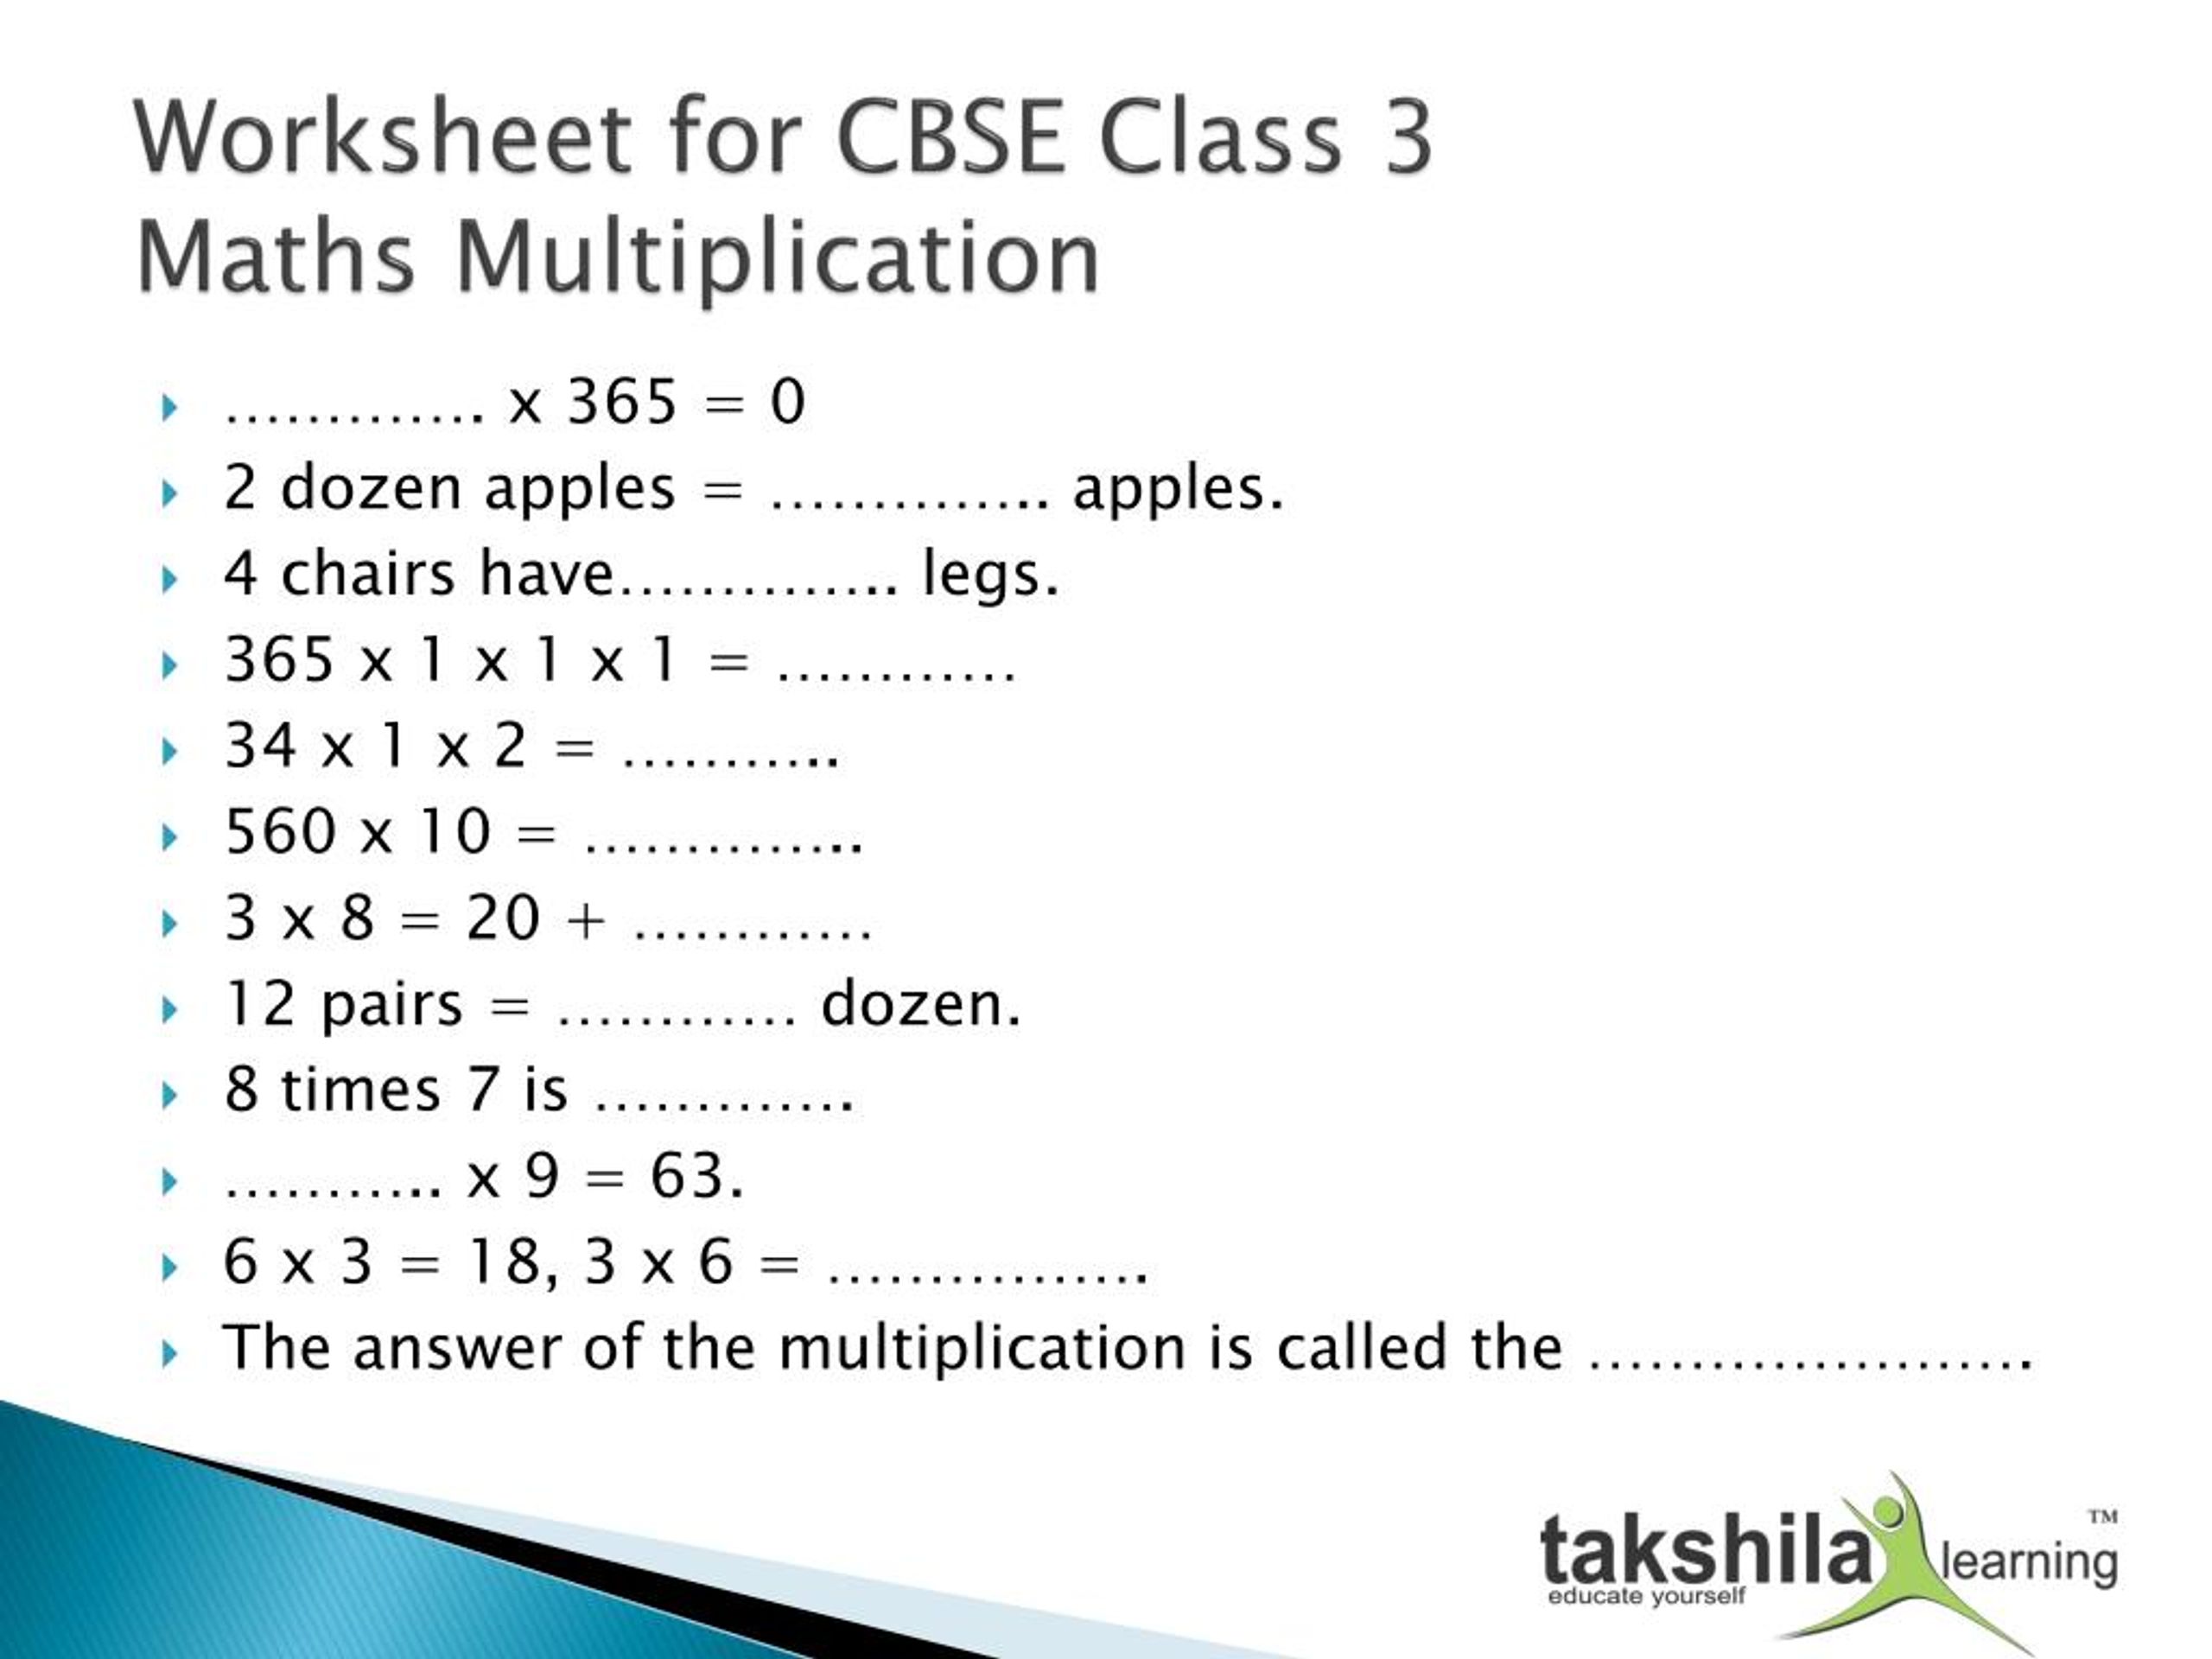 class-vedic-maths-subtraction-worksheets-first-grade-subtraction-worksheet-want-to-help